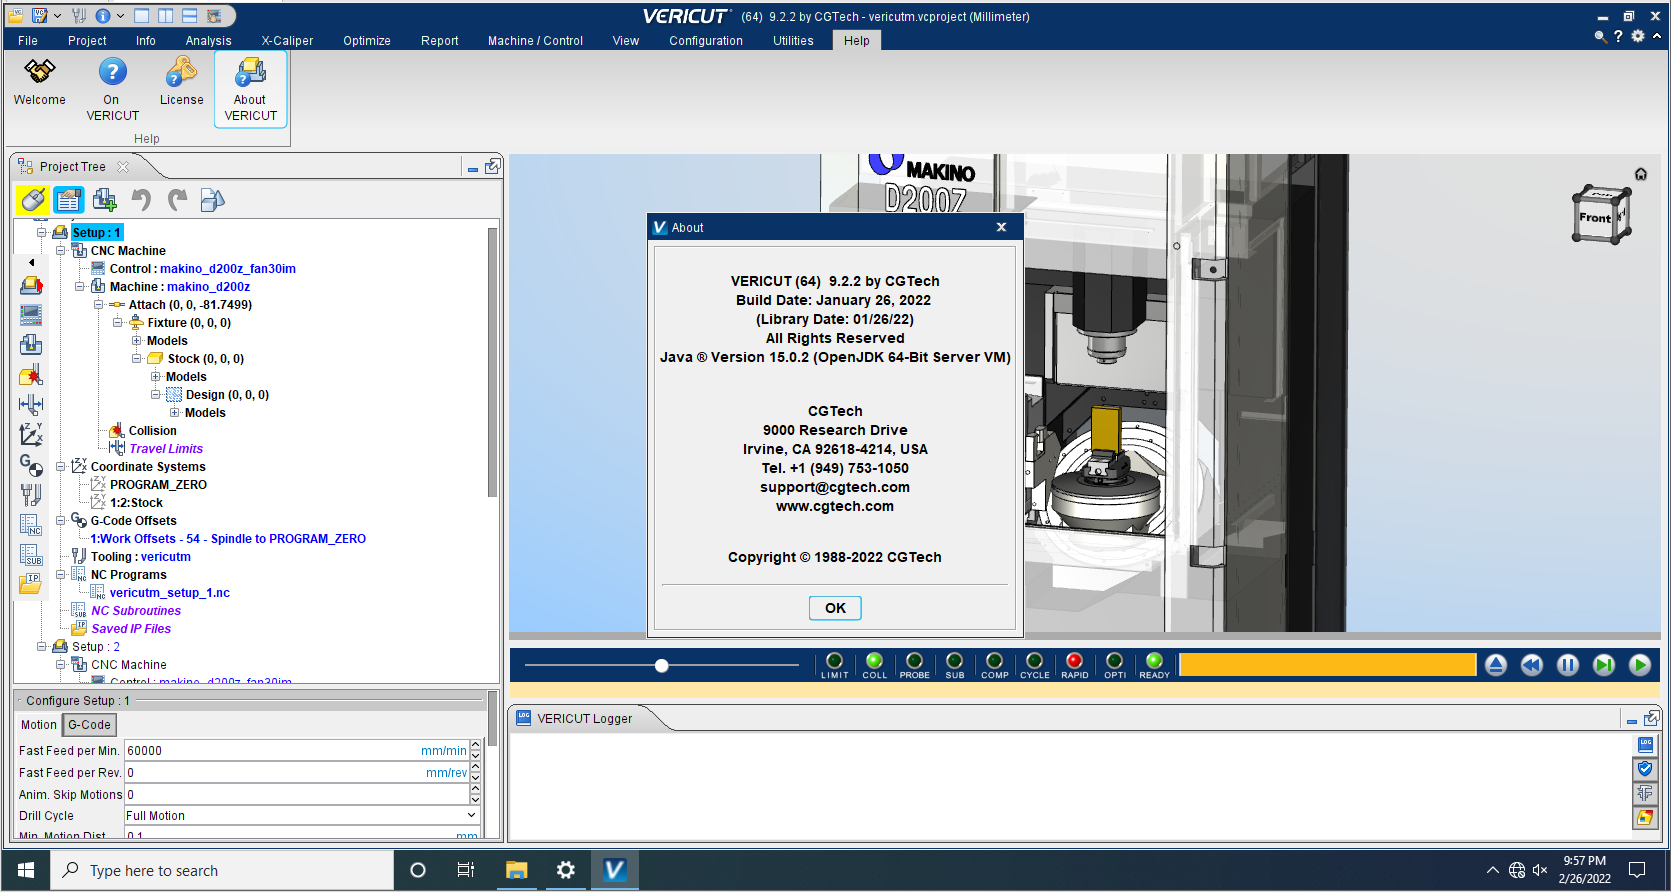 Working with CGTech VERICUT 9.2.2 full license